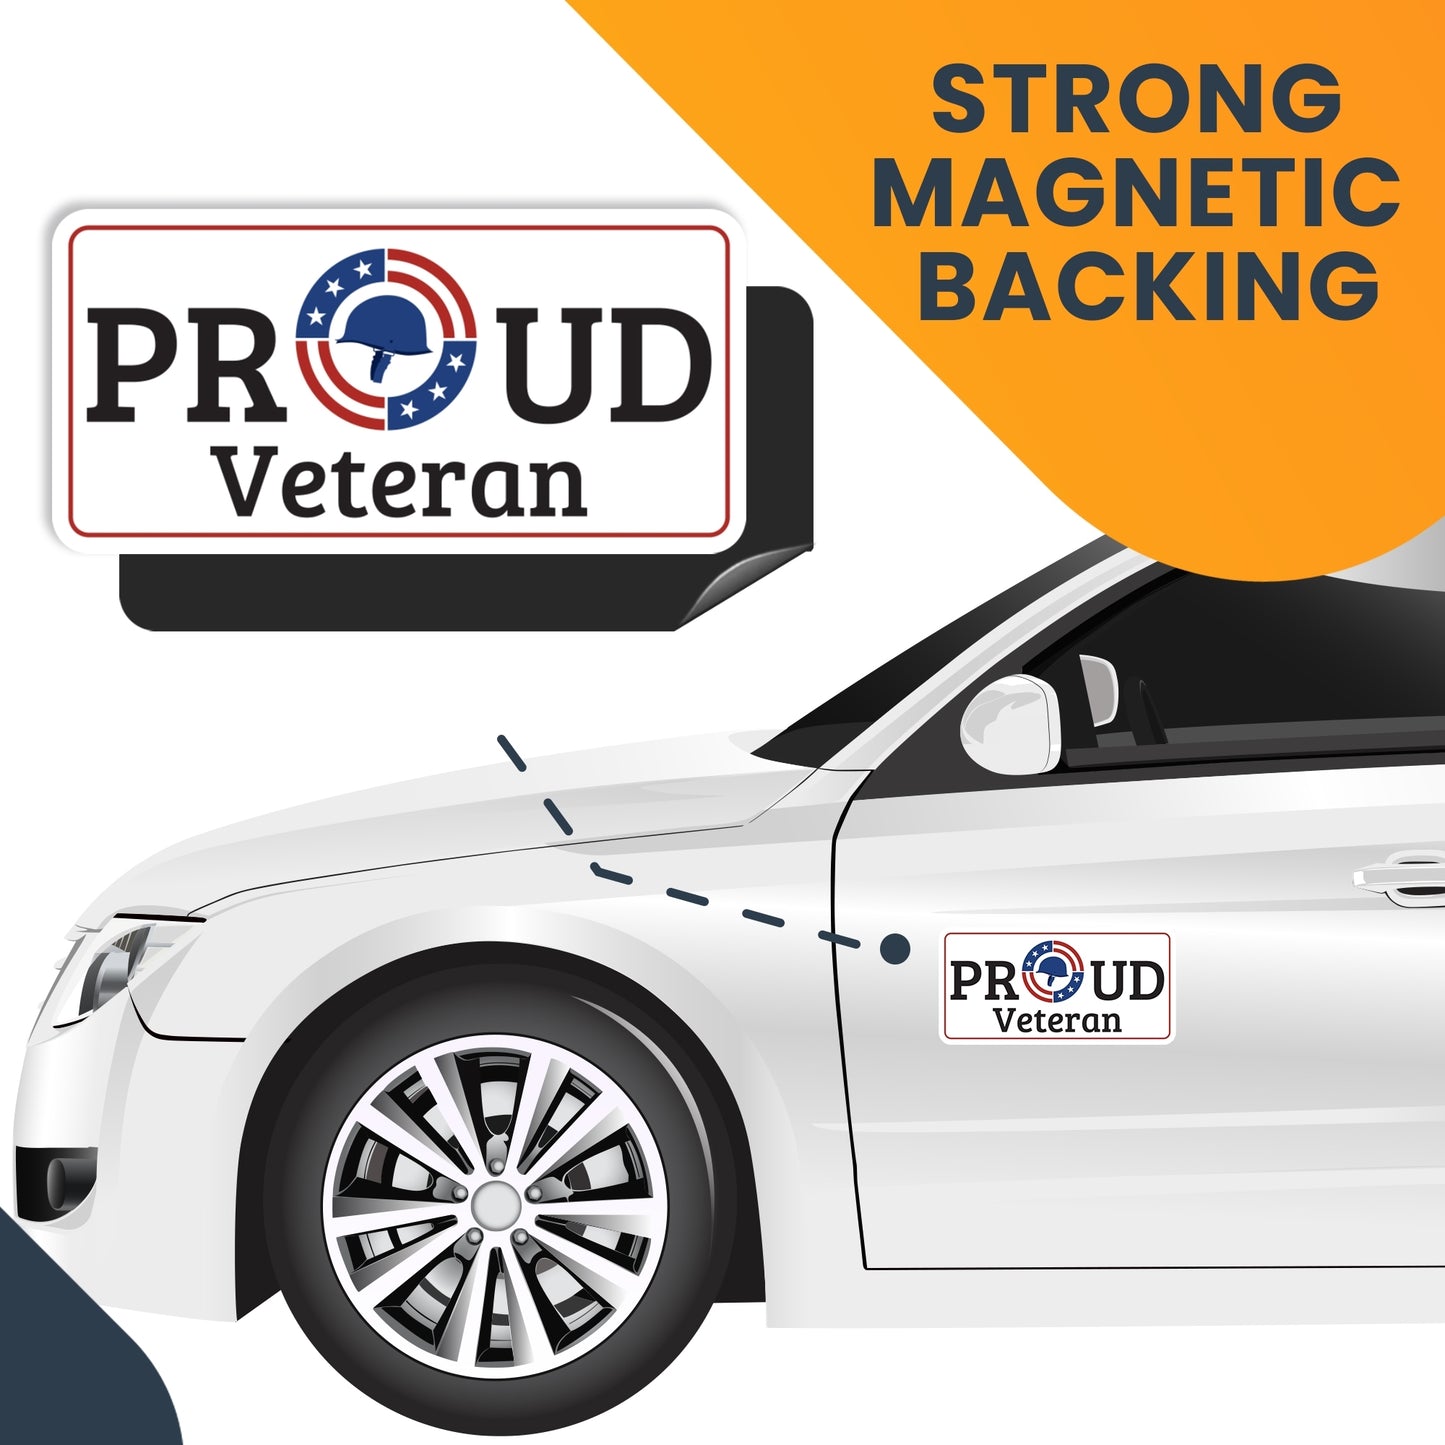 Magnet Me Up Proud Veteran Patriotic Military Magnet Decal, 6.5x3 Inch, Perfect for Car, Truck, SUV Or Any Magnetic Surface, Gift, in Support of Veterans, Active Duty, Armed Forces